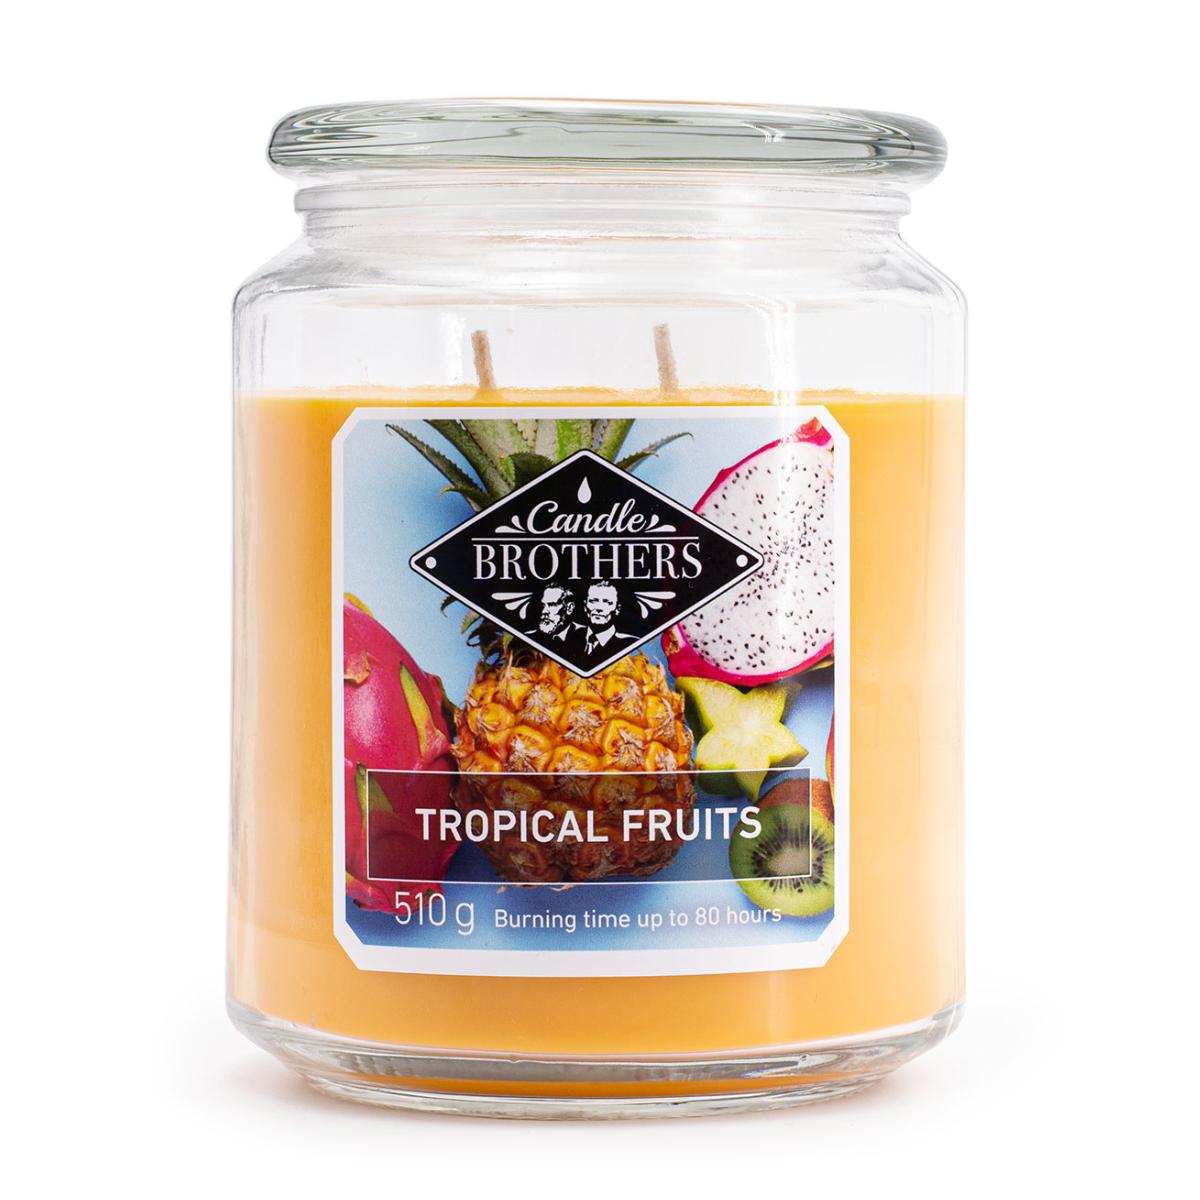 Tropical Fruits - Duftkerze 510g von Candle Brothers